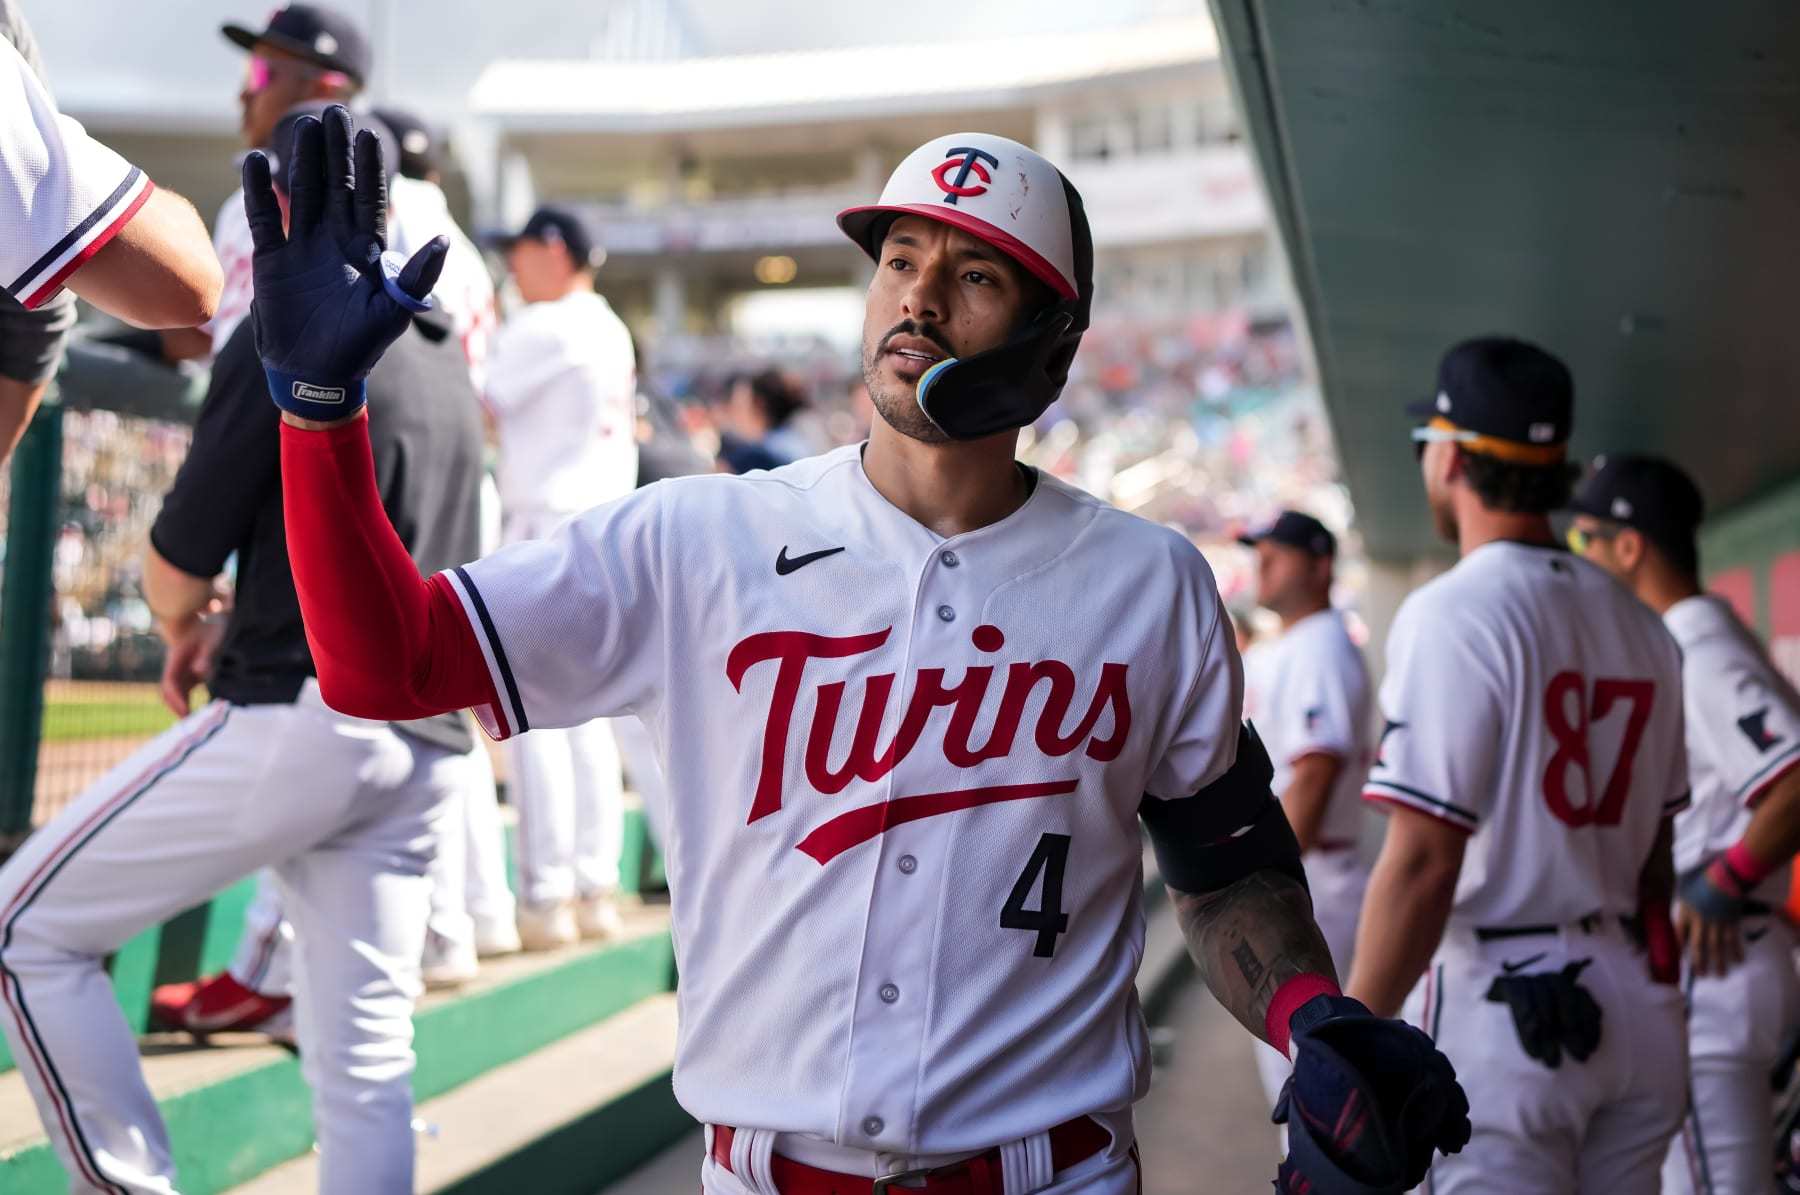 Consistent playing time, new outlook helps Kyle Farmer settle in as Twins'  third baseman – Twin Cities